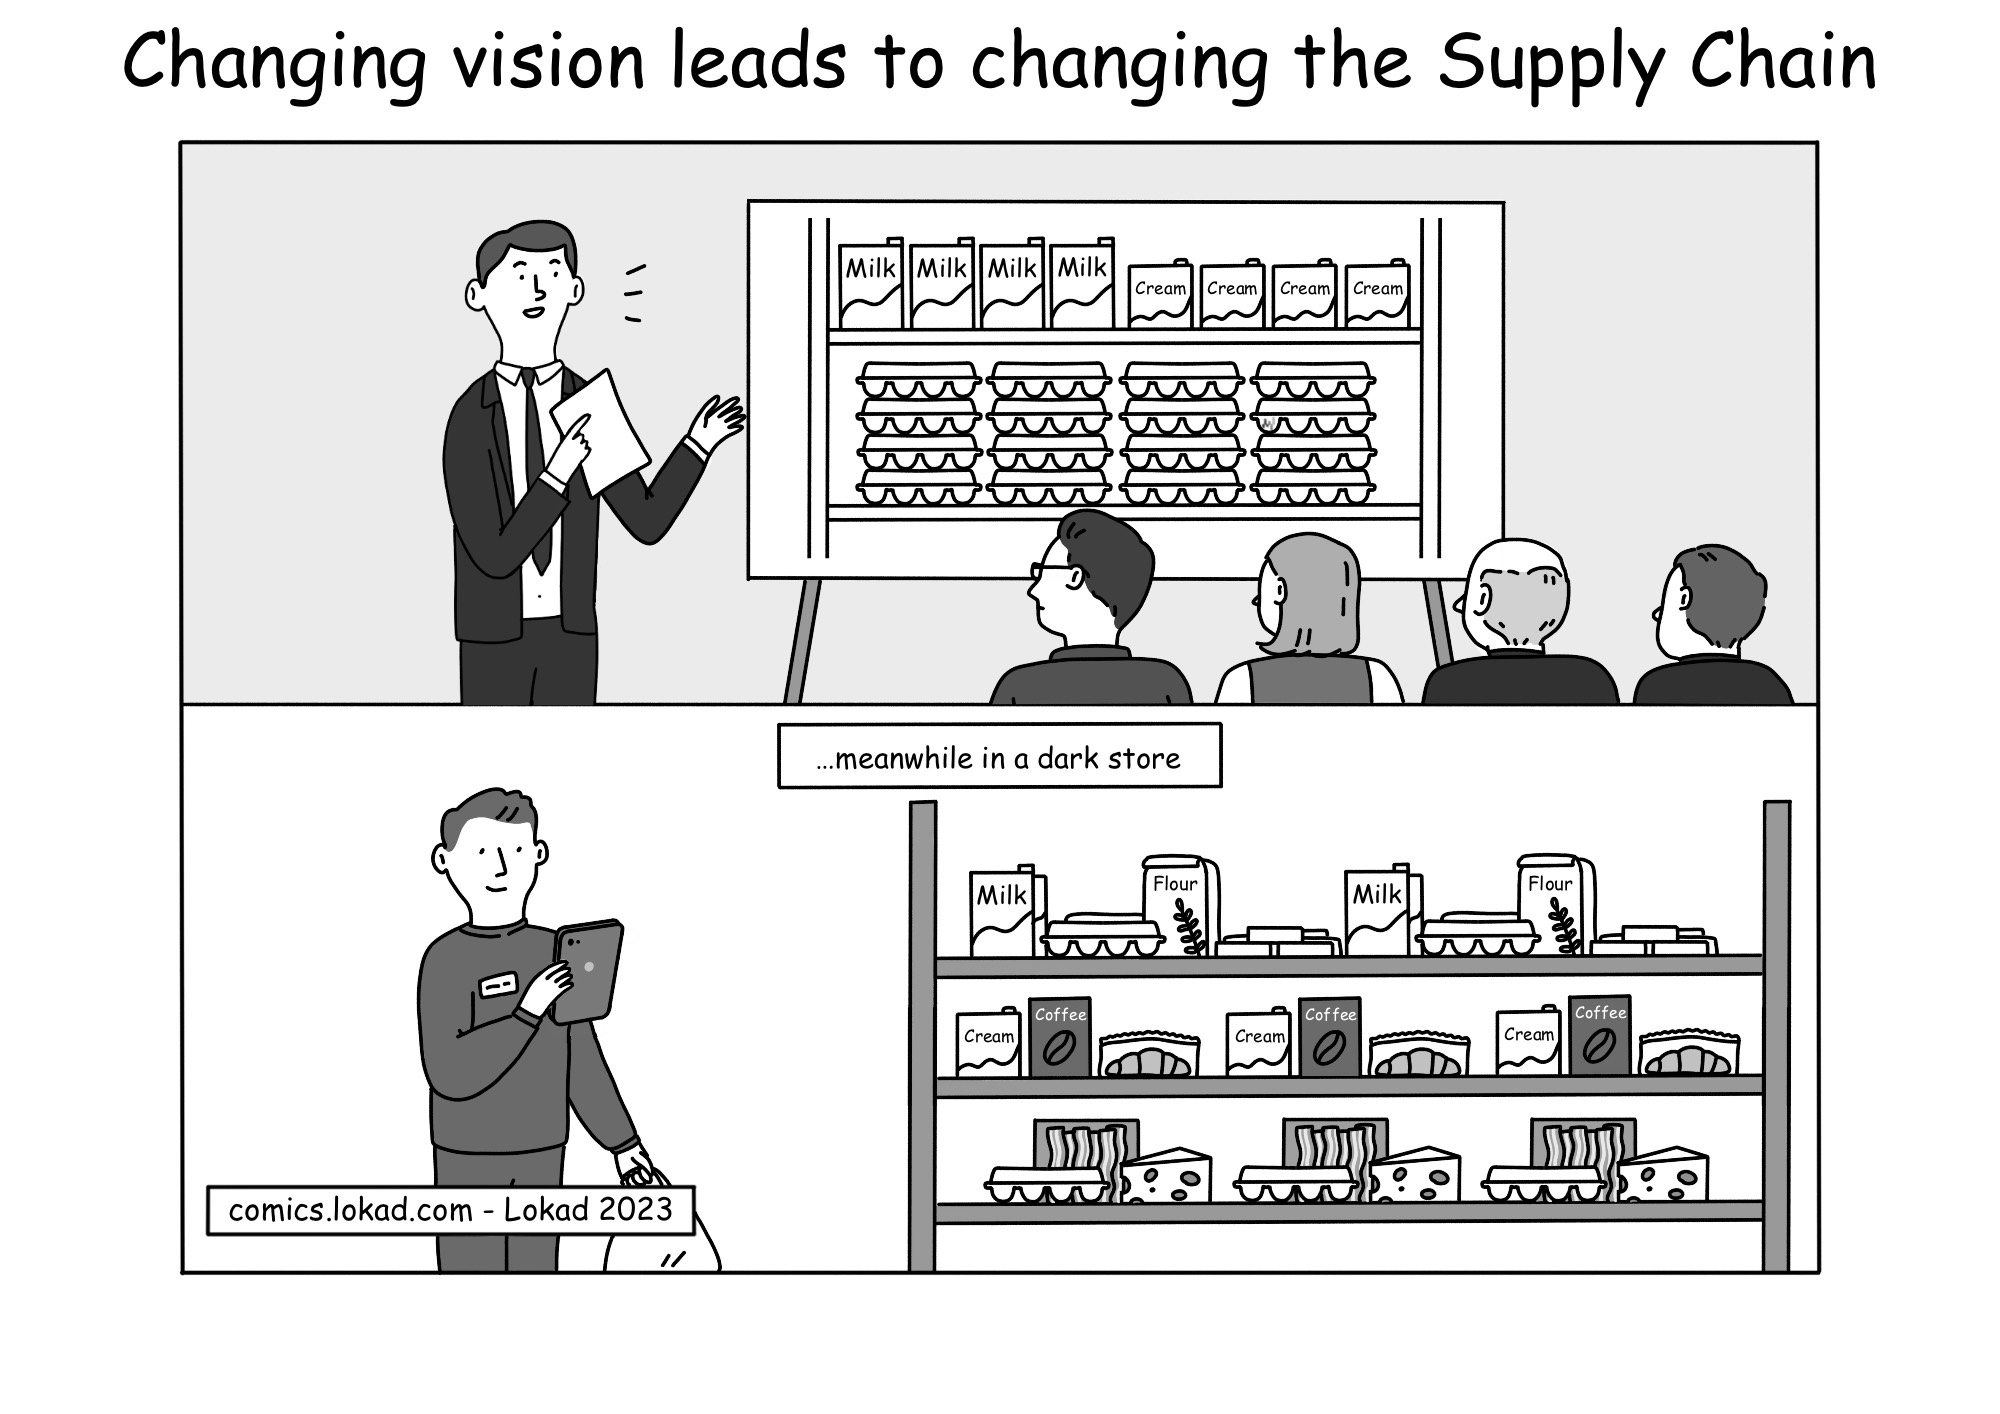 Changing vision leads to changing the Supply Chain